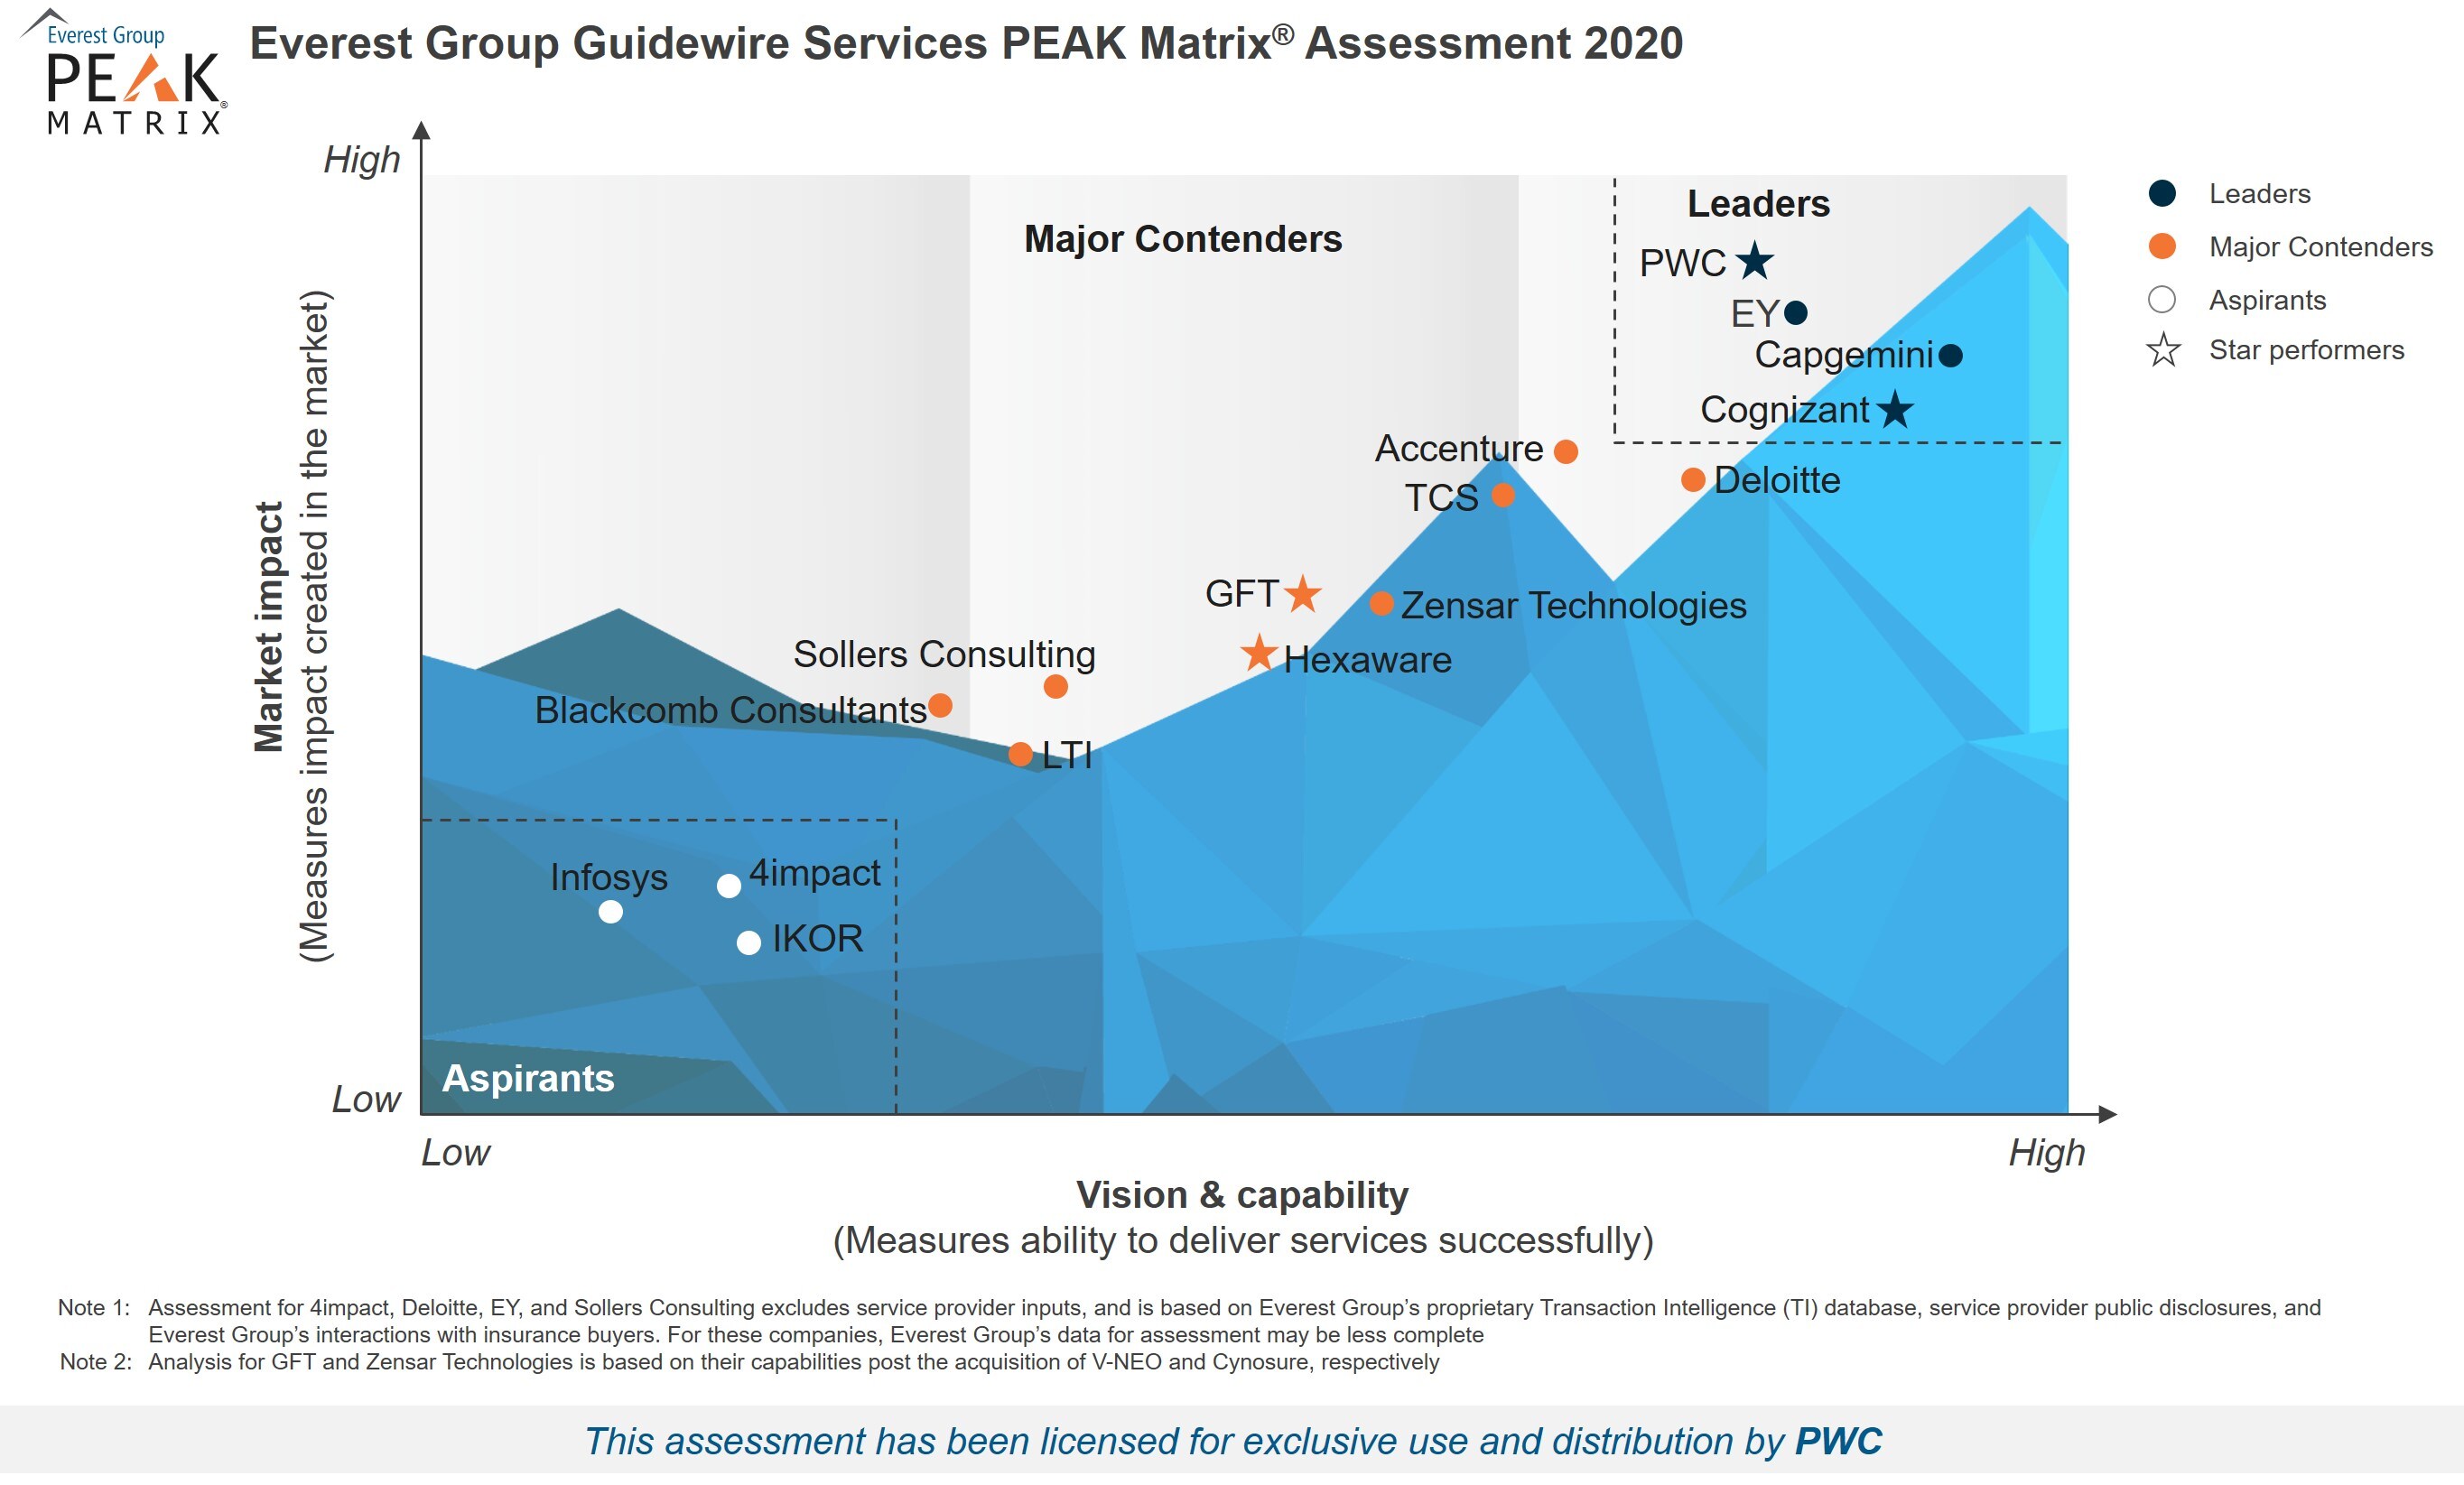 PwC named a Leader and Star Performer in Everest Group Guidewire